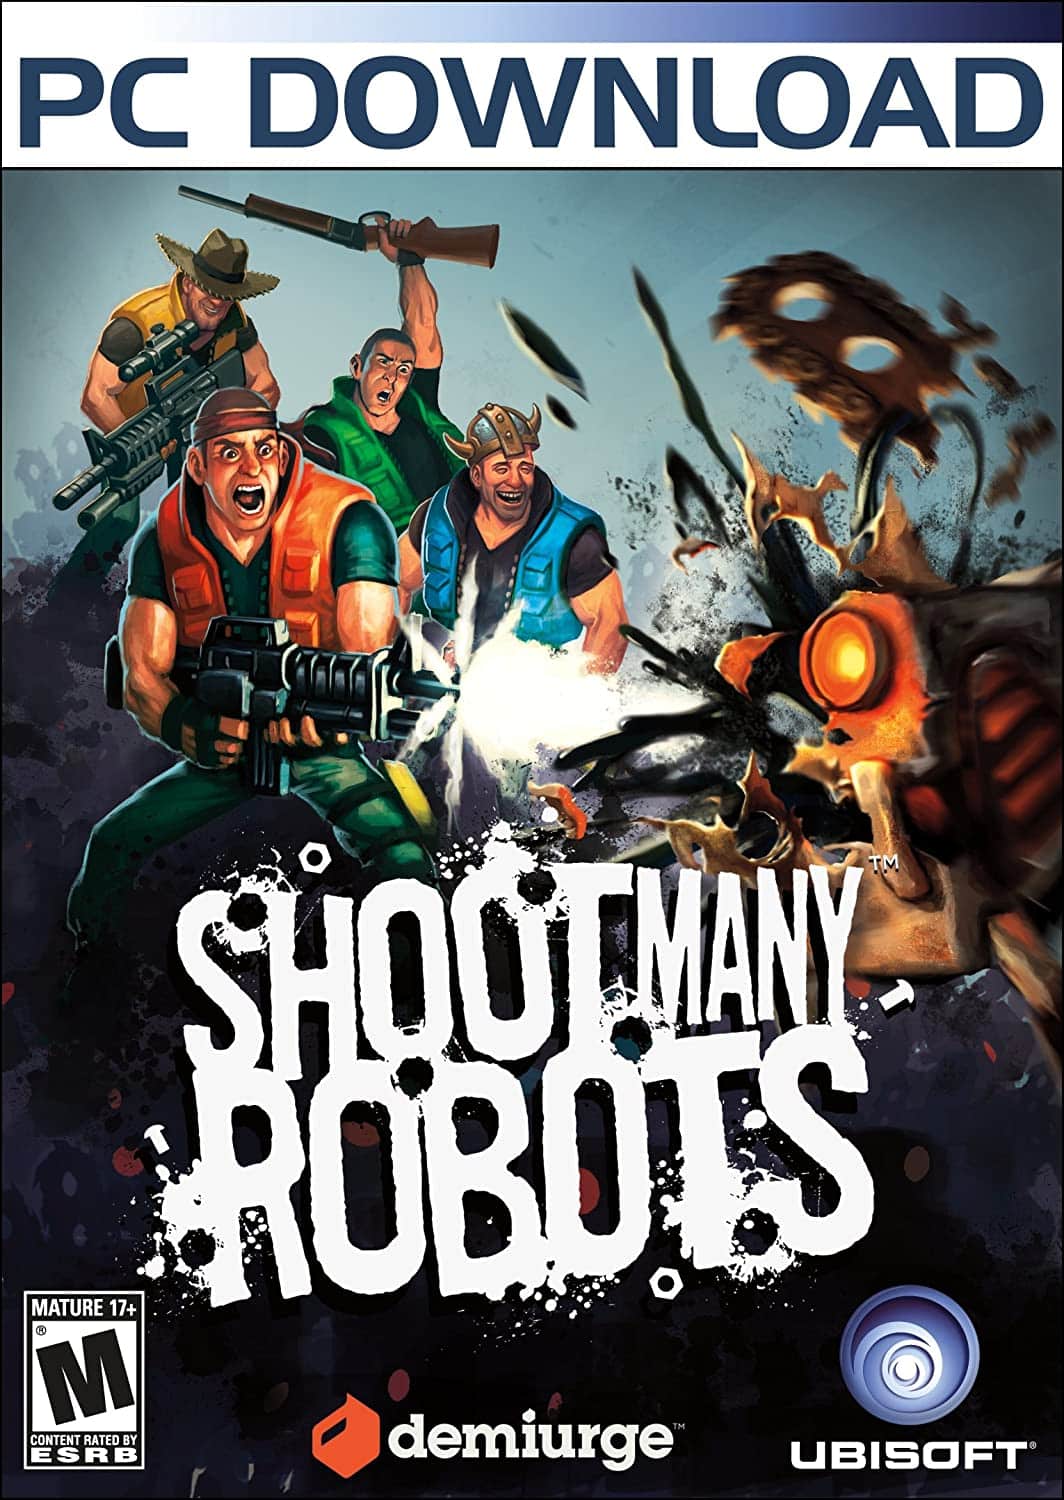 Shoot Many Robots player count stats